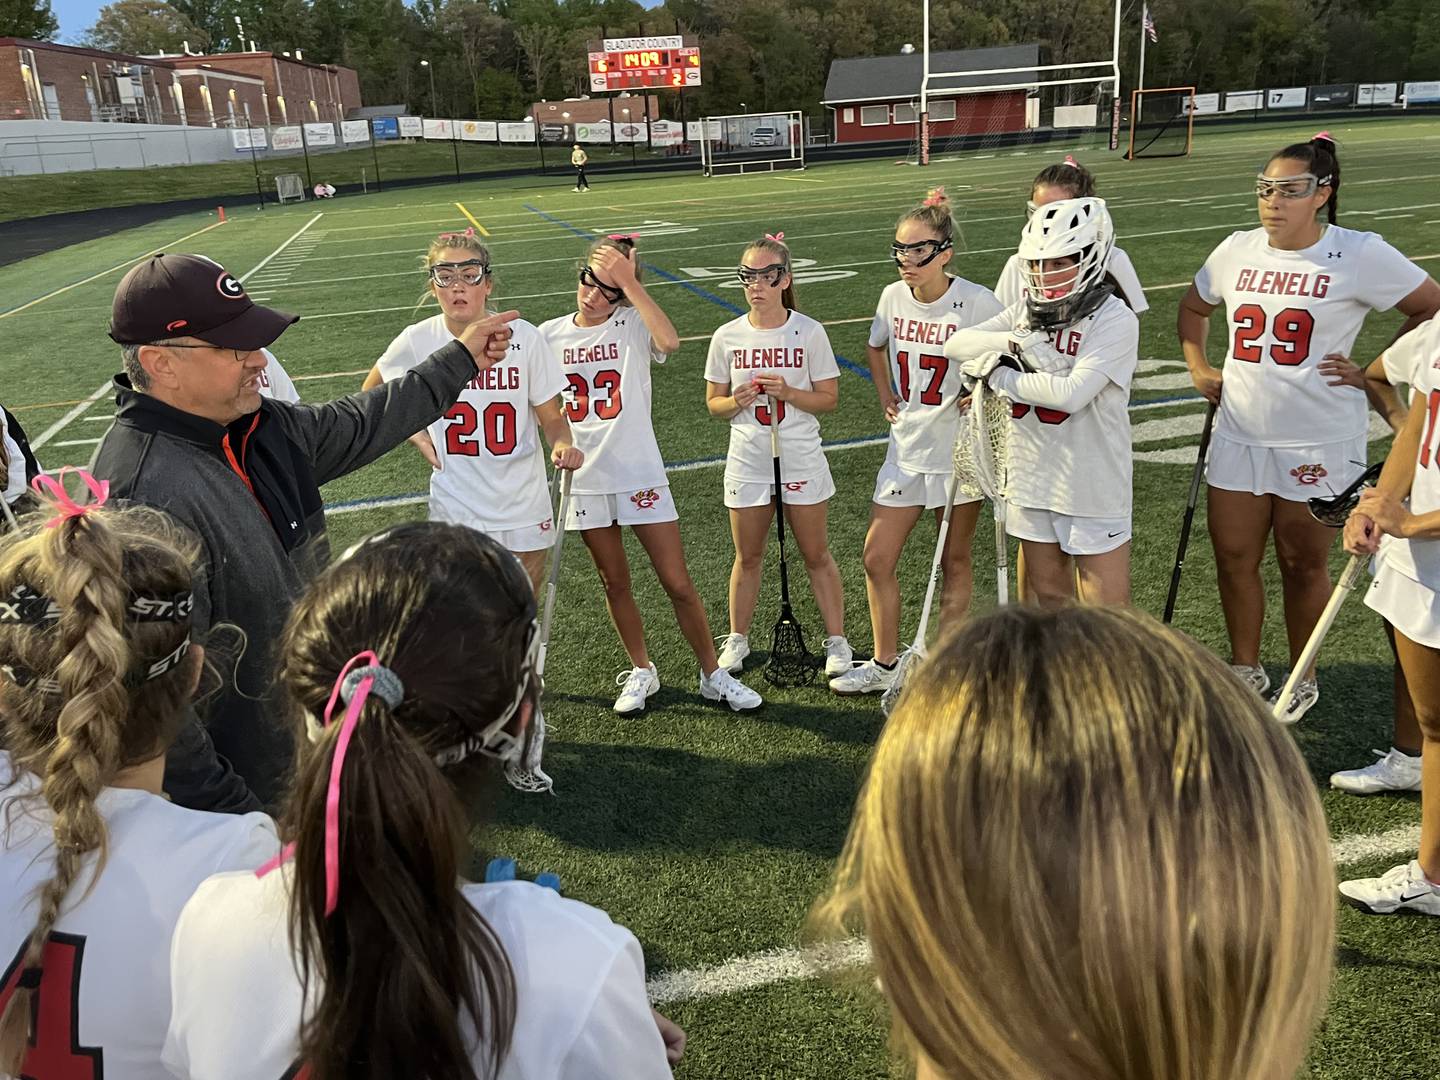 Glenelg girls lacrosse coach Alex Pagnotta (left) talks to his team during a timeout in Tuesday's Howard County match with Marriotts Ridge. The No. 7 Gladiators overcame a shaky second half effort to post a 7-5 victory over the 13th-ranked Mustangs in Western Howard County.